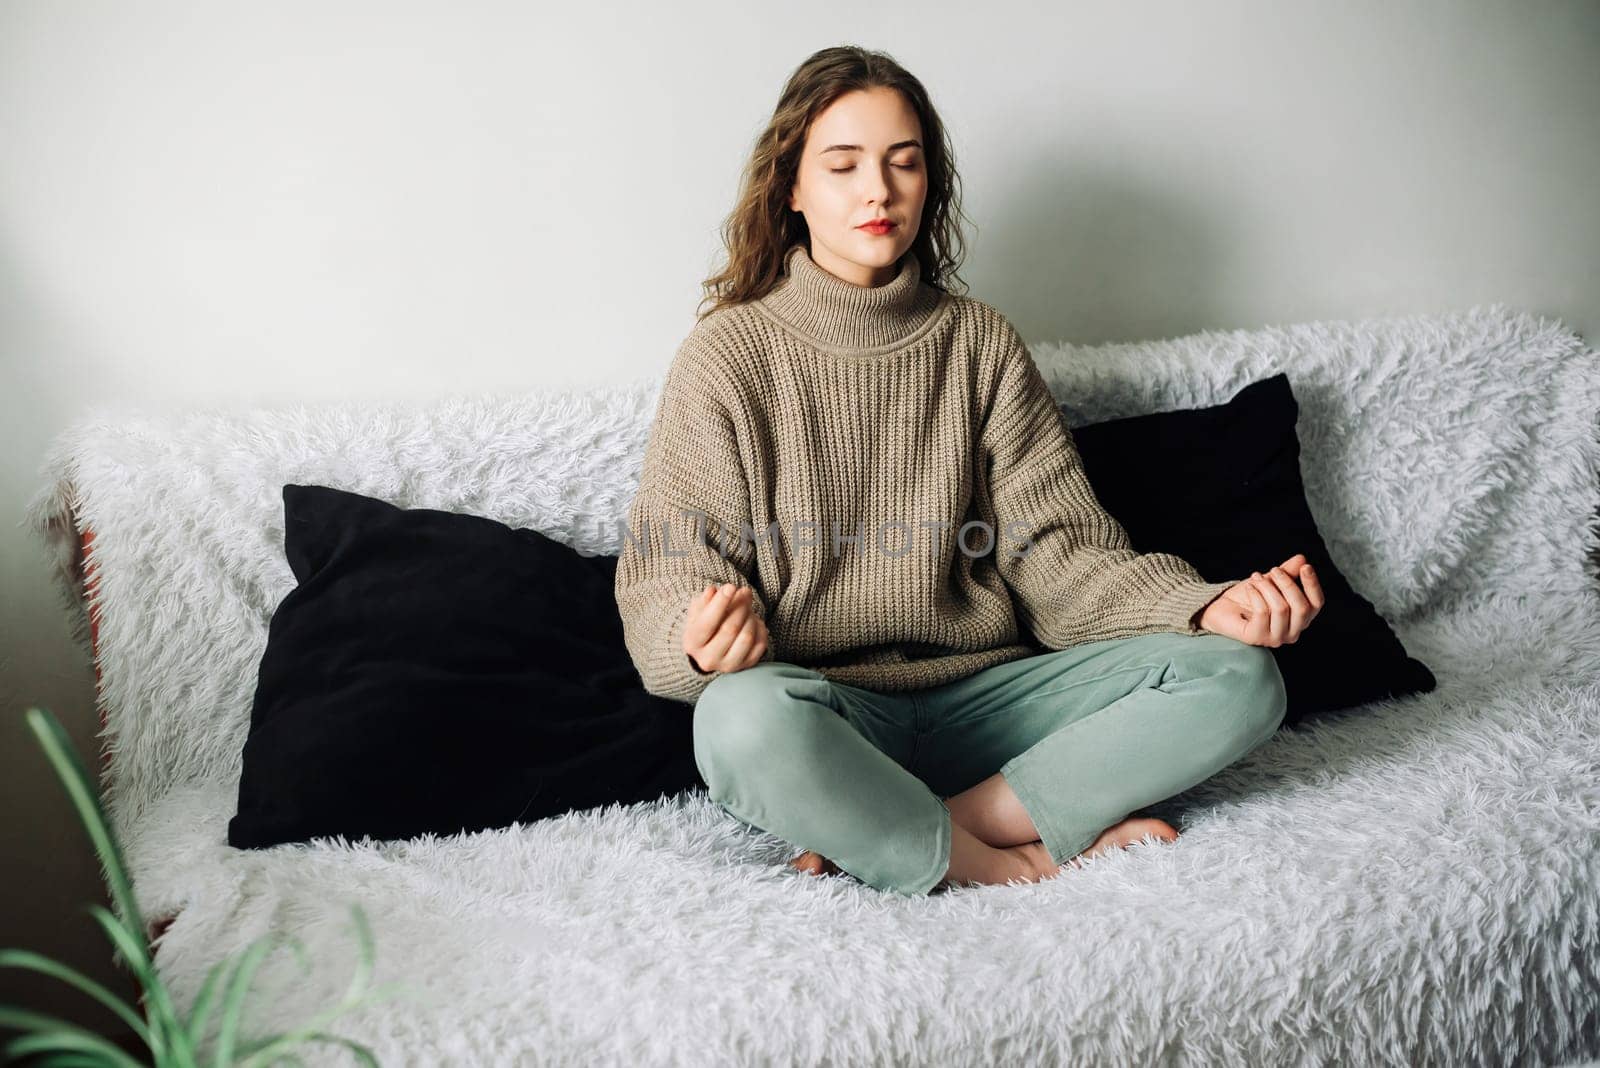 Young woman sitting in lotus position on the sofa with her hands on her knees, meditating, trying to relax her mind and relieve stress.